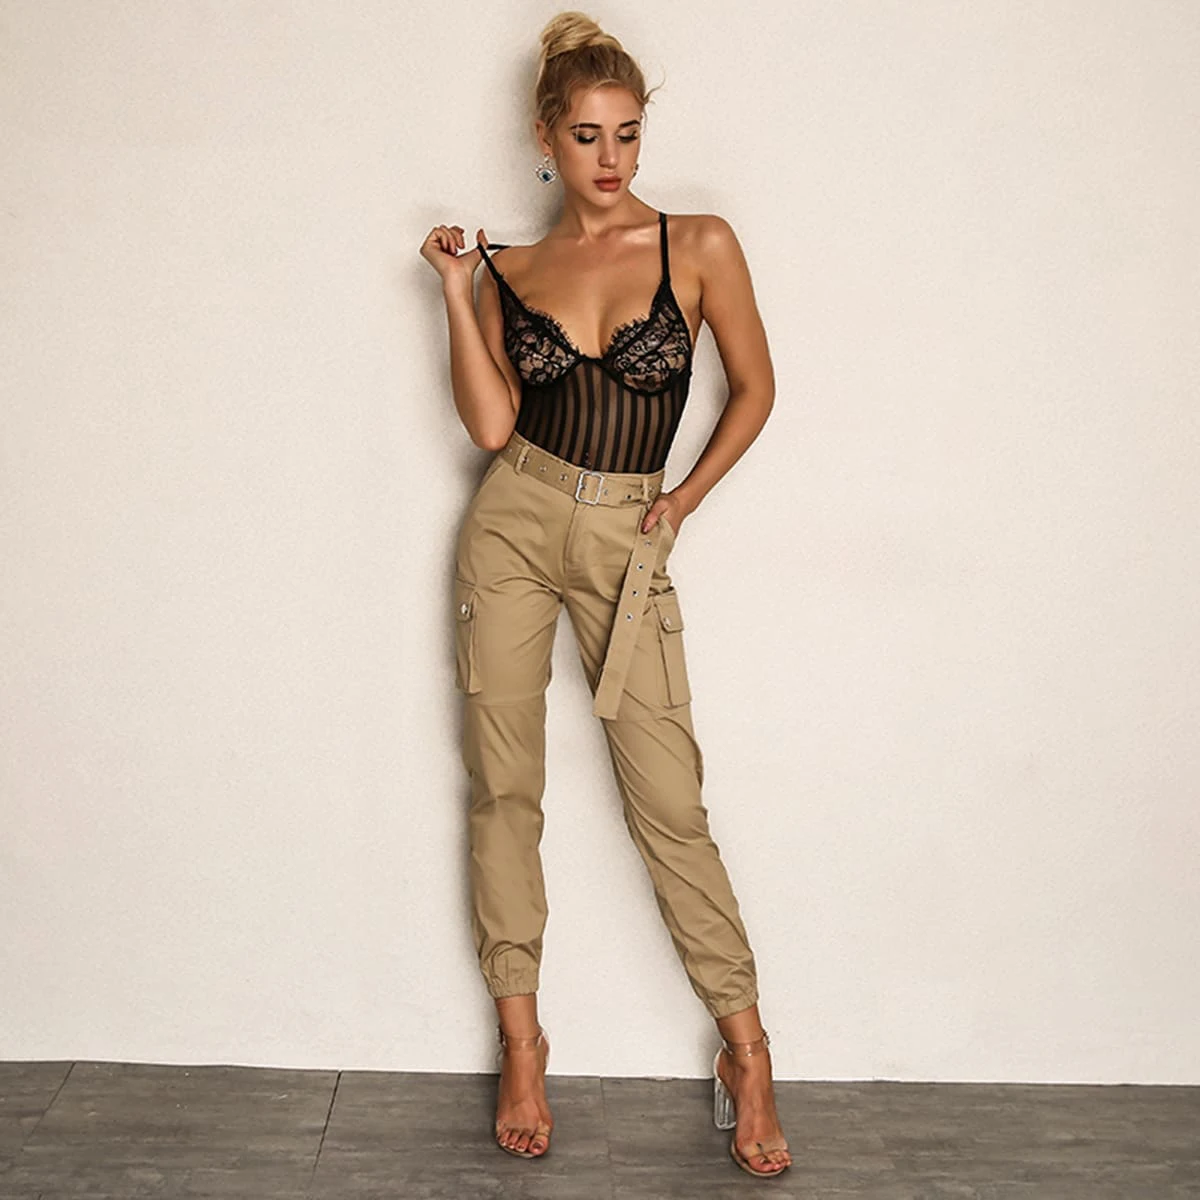 

Evaqueen Solid Khaki Casual Sashes Cargo Pants For Women Zippered Fly Pockets Long Pants High Waist Slim Autumn Pencil Trousers